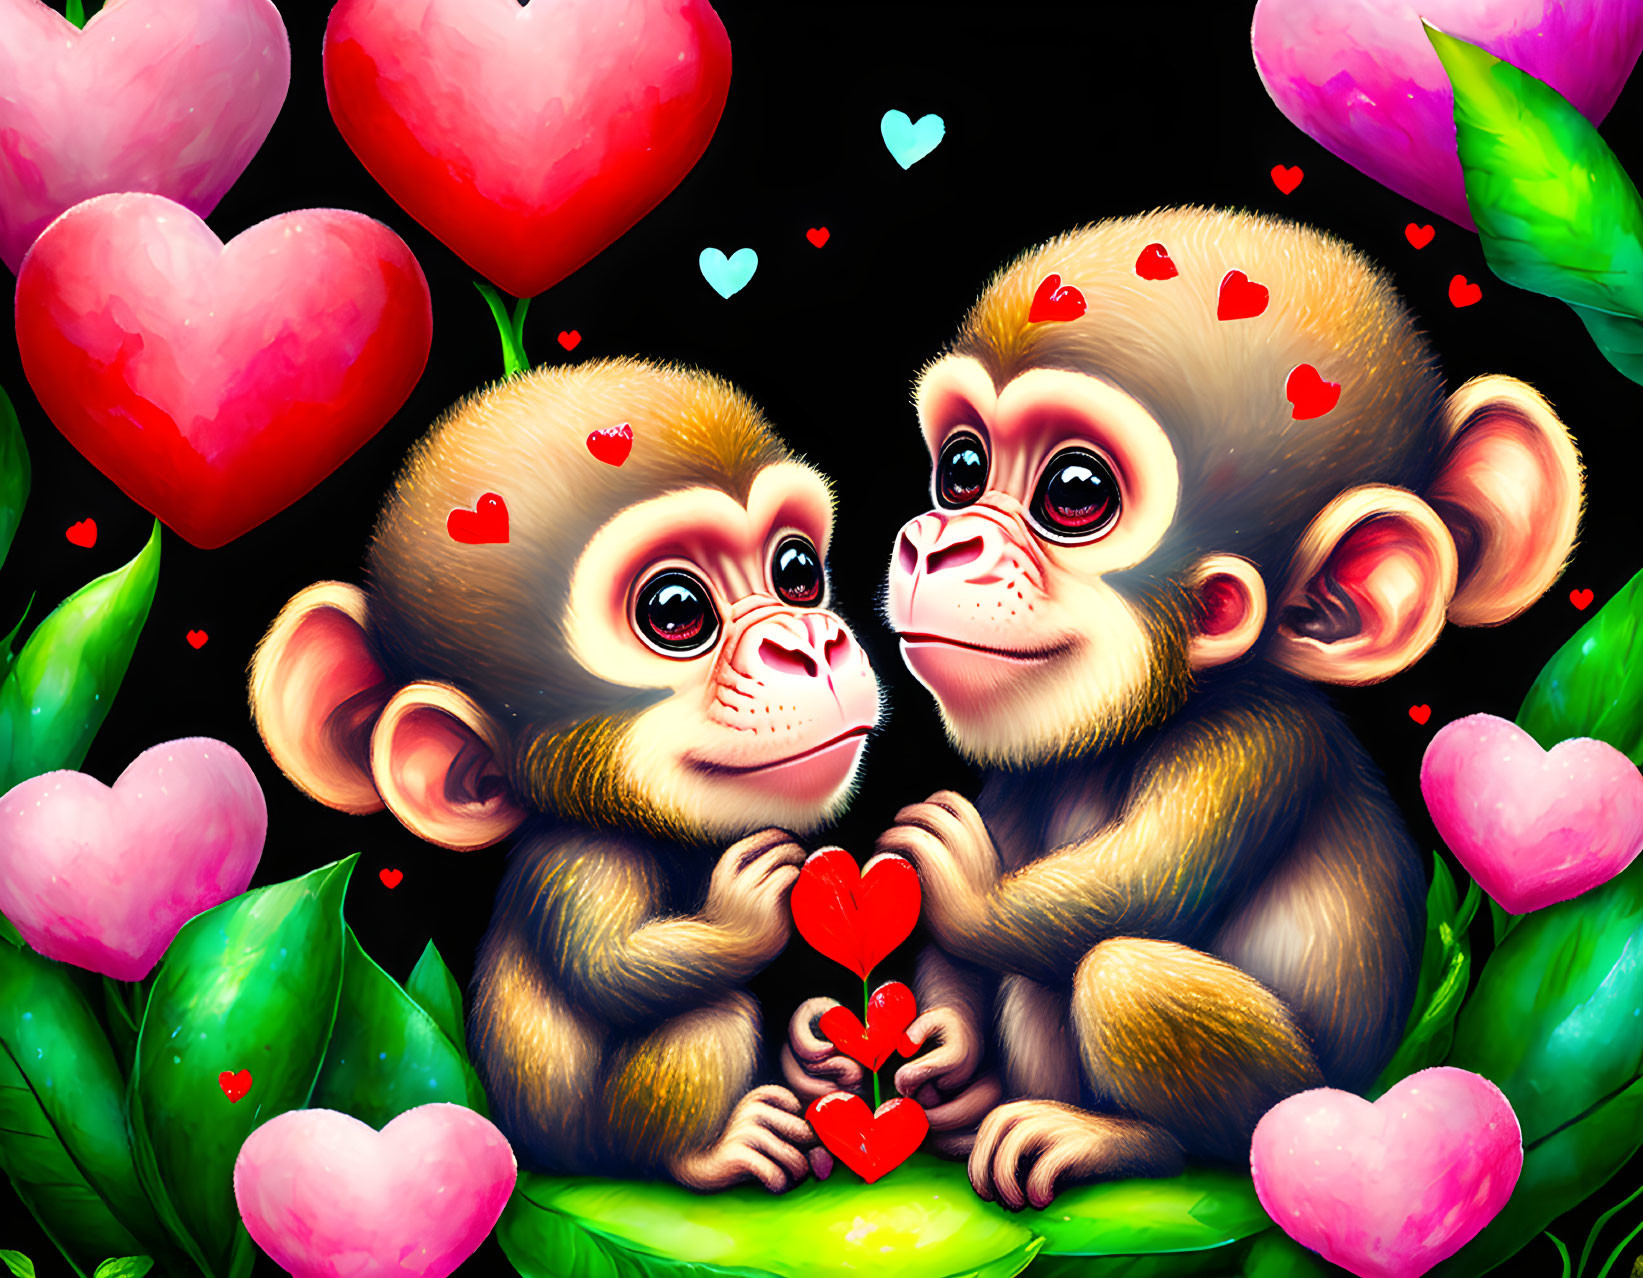 Cartoon monkeys holding heart puzzle piece surrounded by colorful hearts and leaves